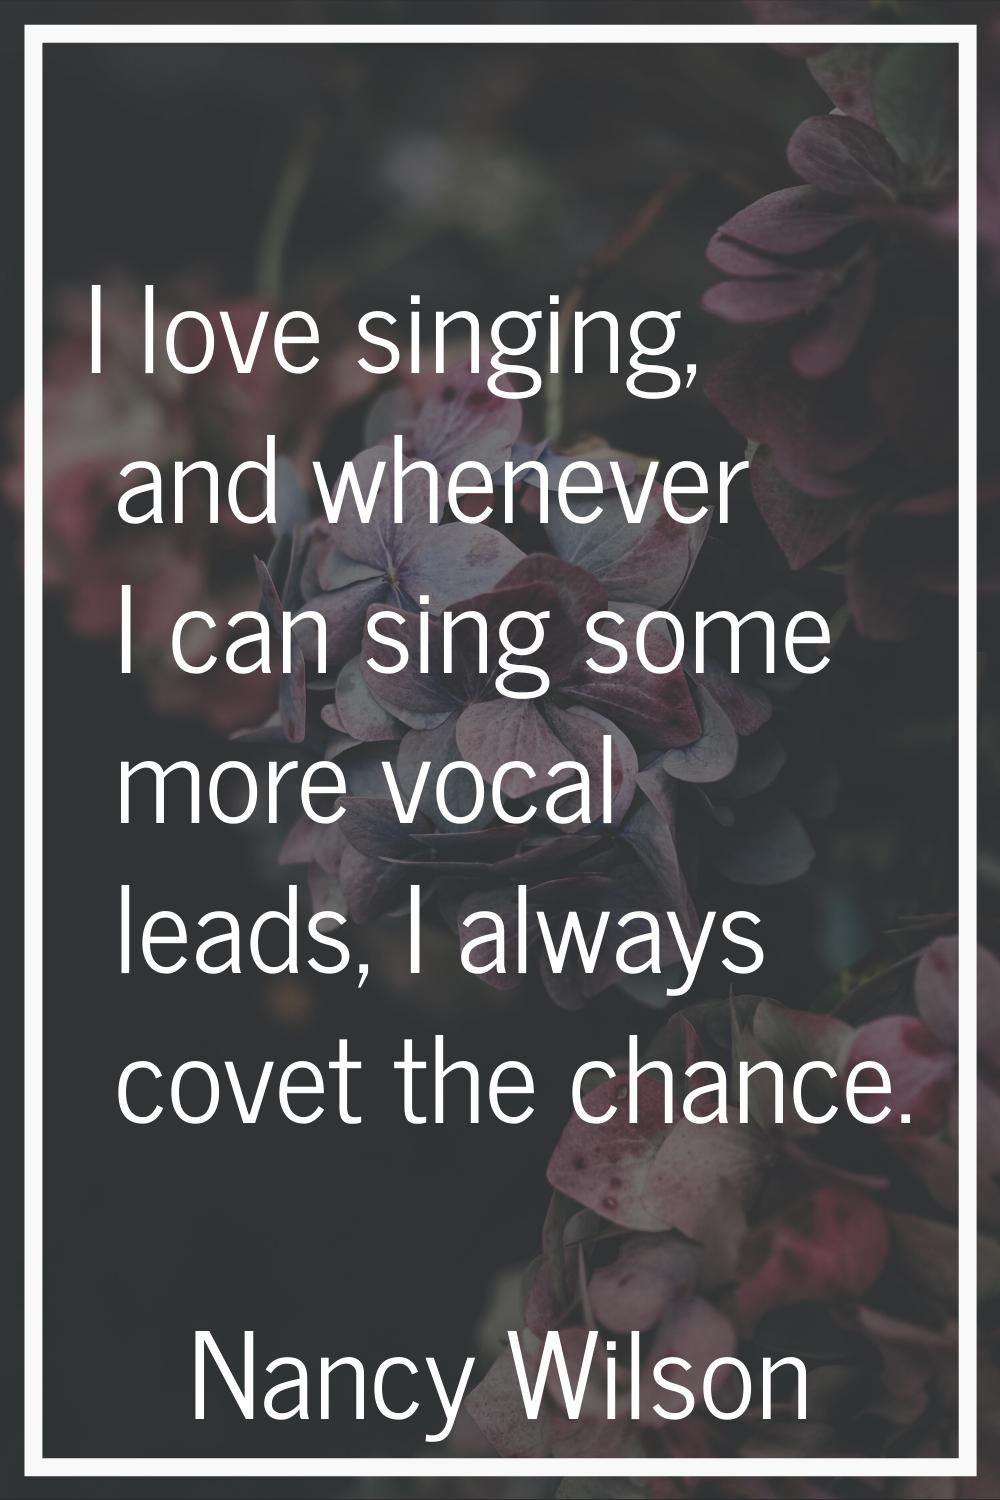 I love singing, and whenever I can sing some more vocal leads, I always covet the chance.